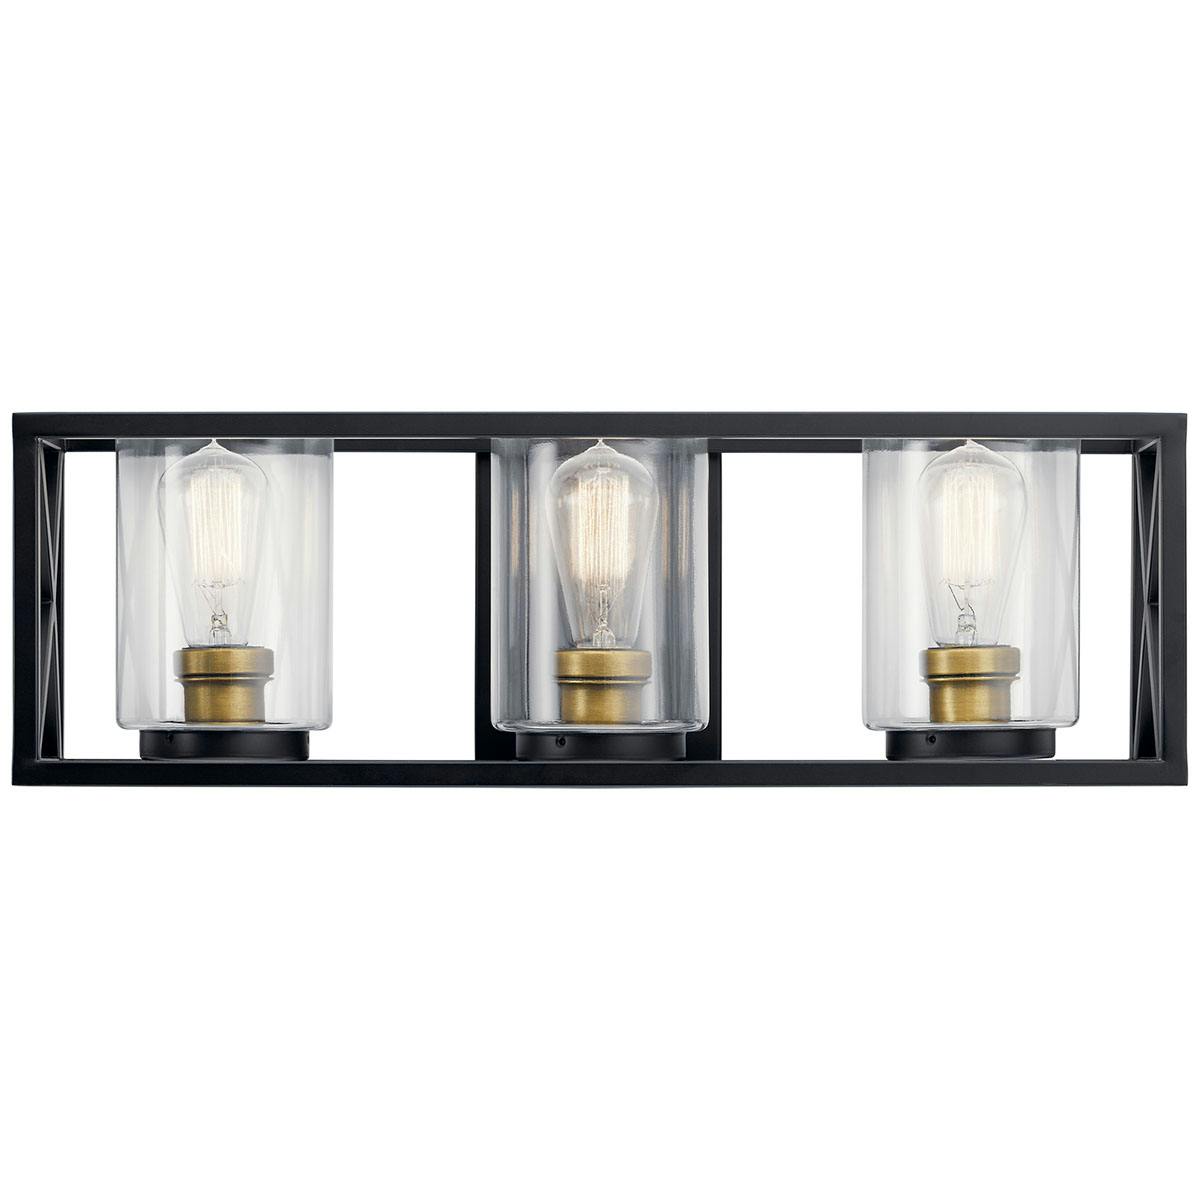 The Moorgate 23" 3 Light Vanity Light Black facing up on a white background